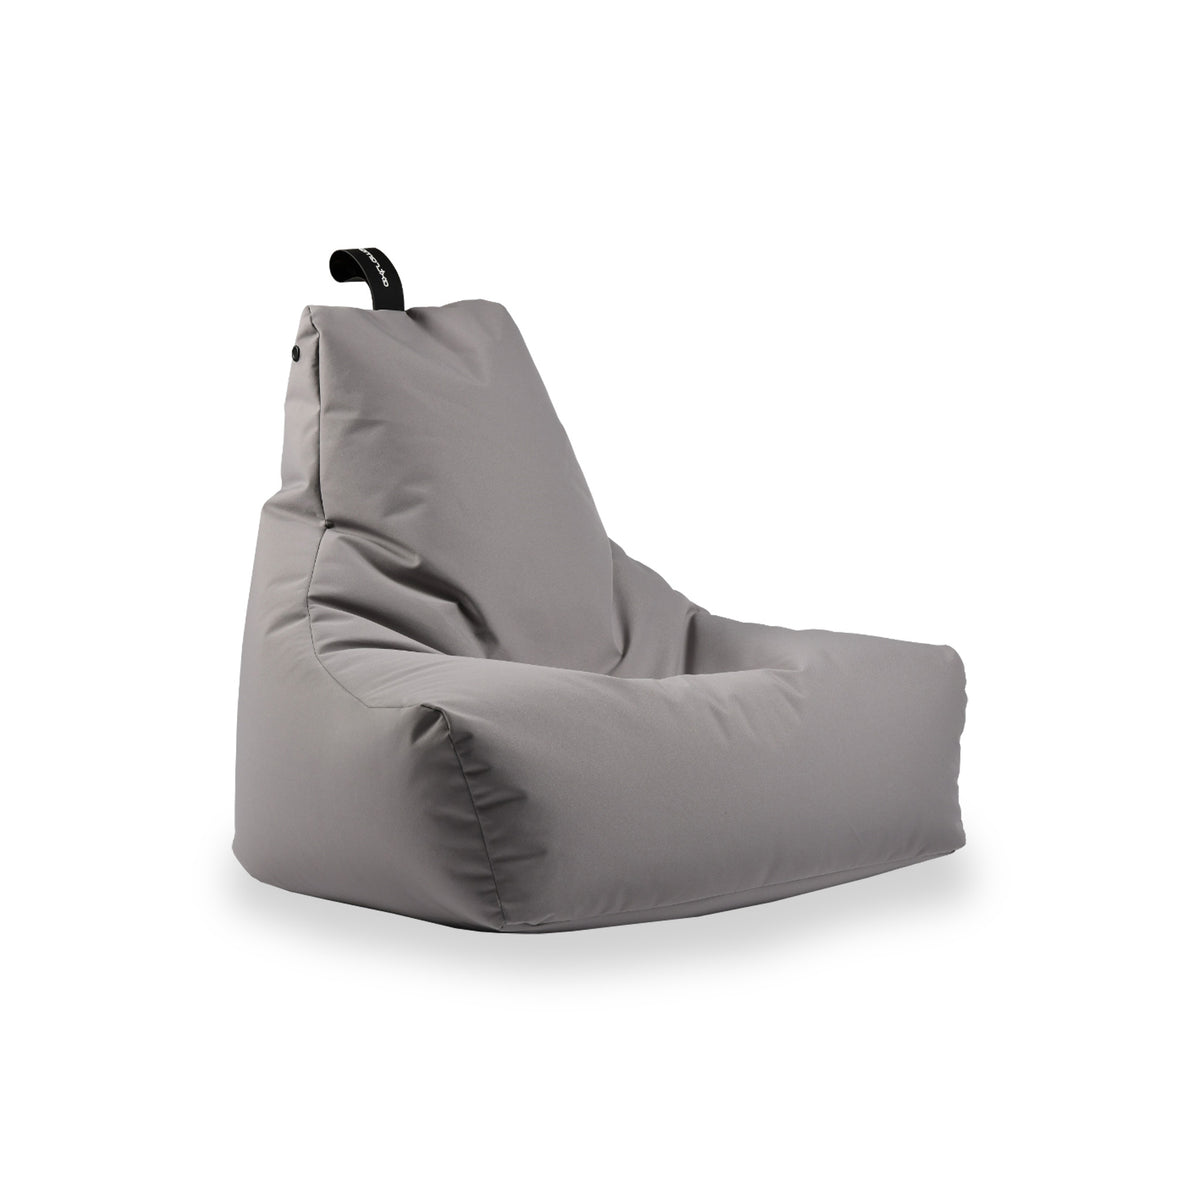 Mighty B Beanbag in Silver Grey from Roseland Furniture